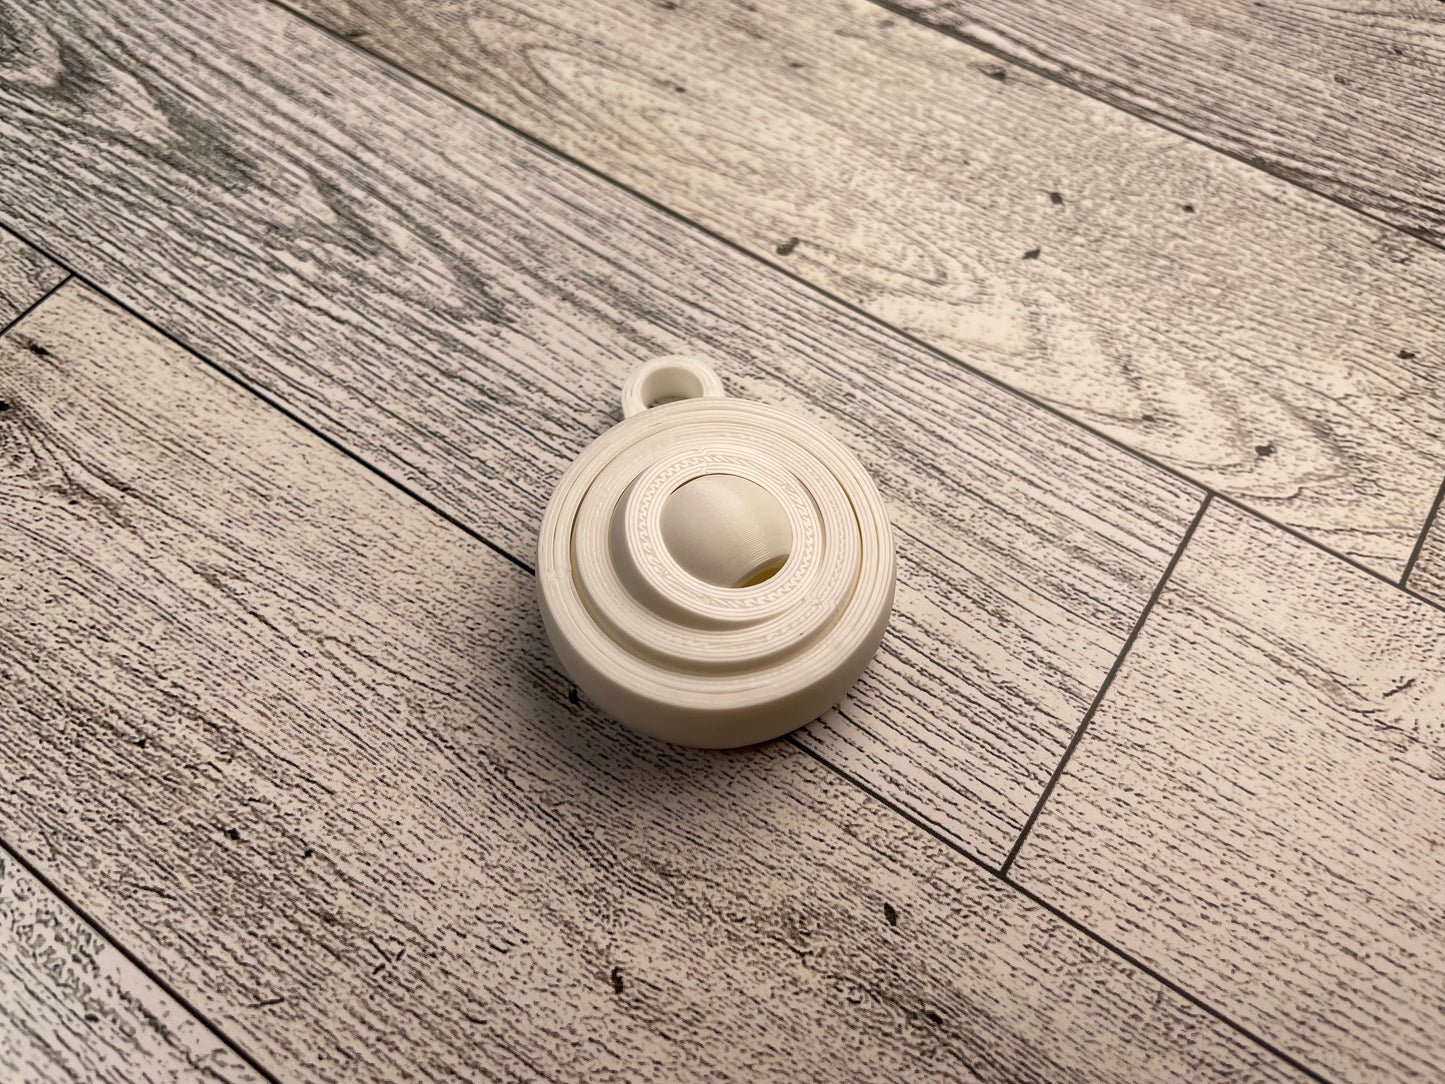 A small 3D printed gyro fidget that is about 1.5 inches in diameter on a wood background. It has four nested circles that can be spun and twirled. It is printed in white filament and has a keyhole for attaching it to a keychain.